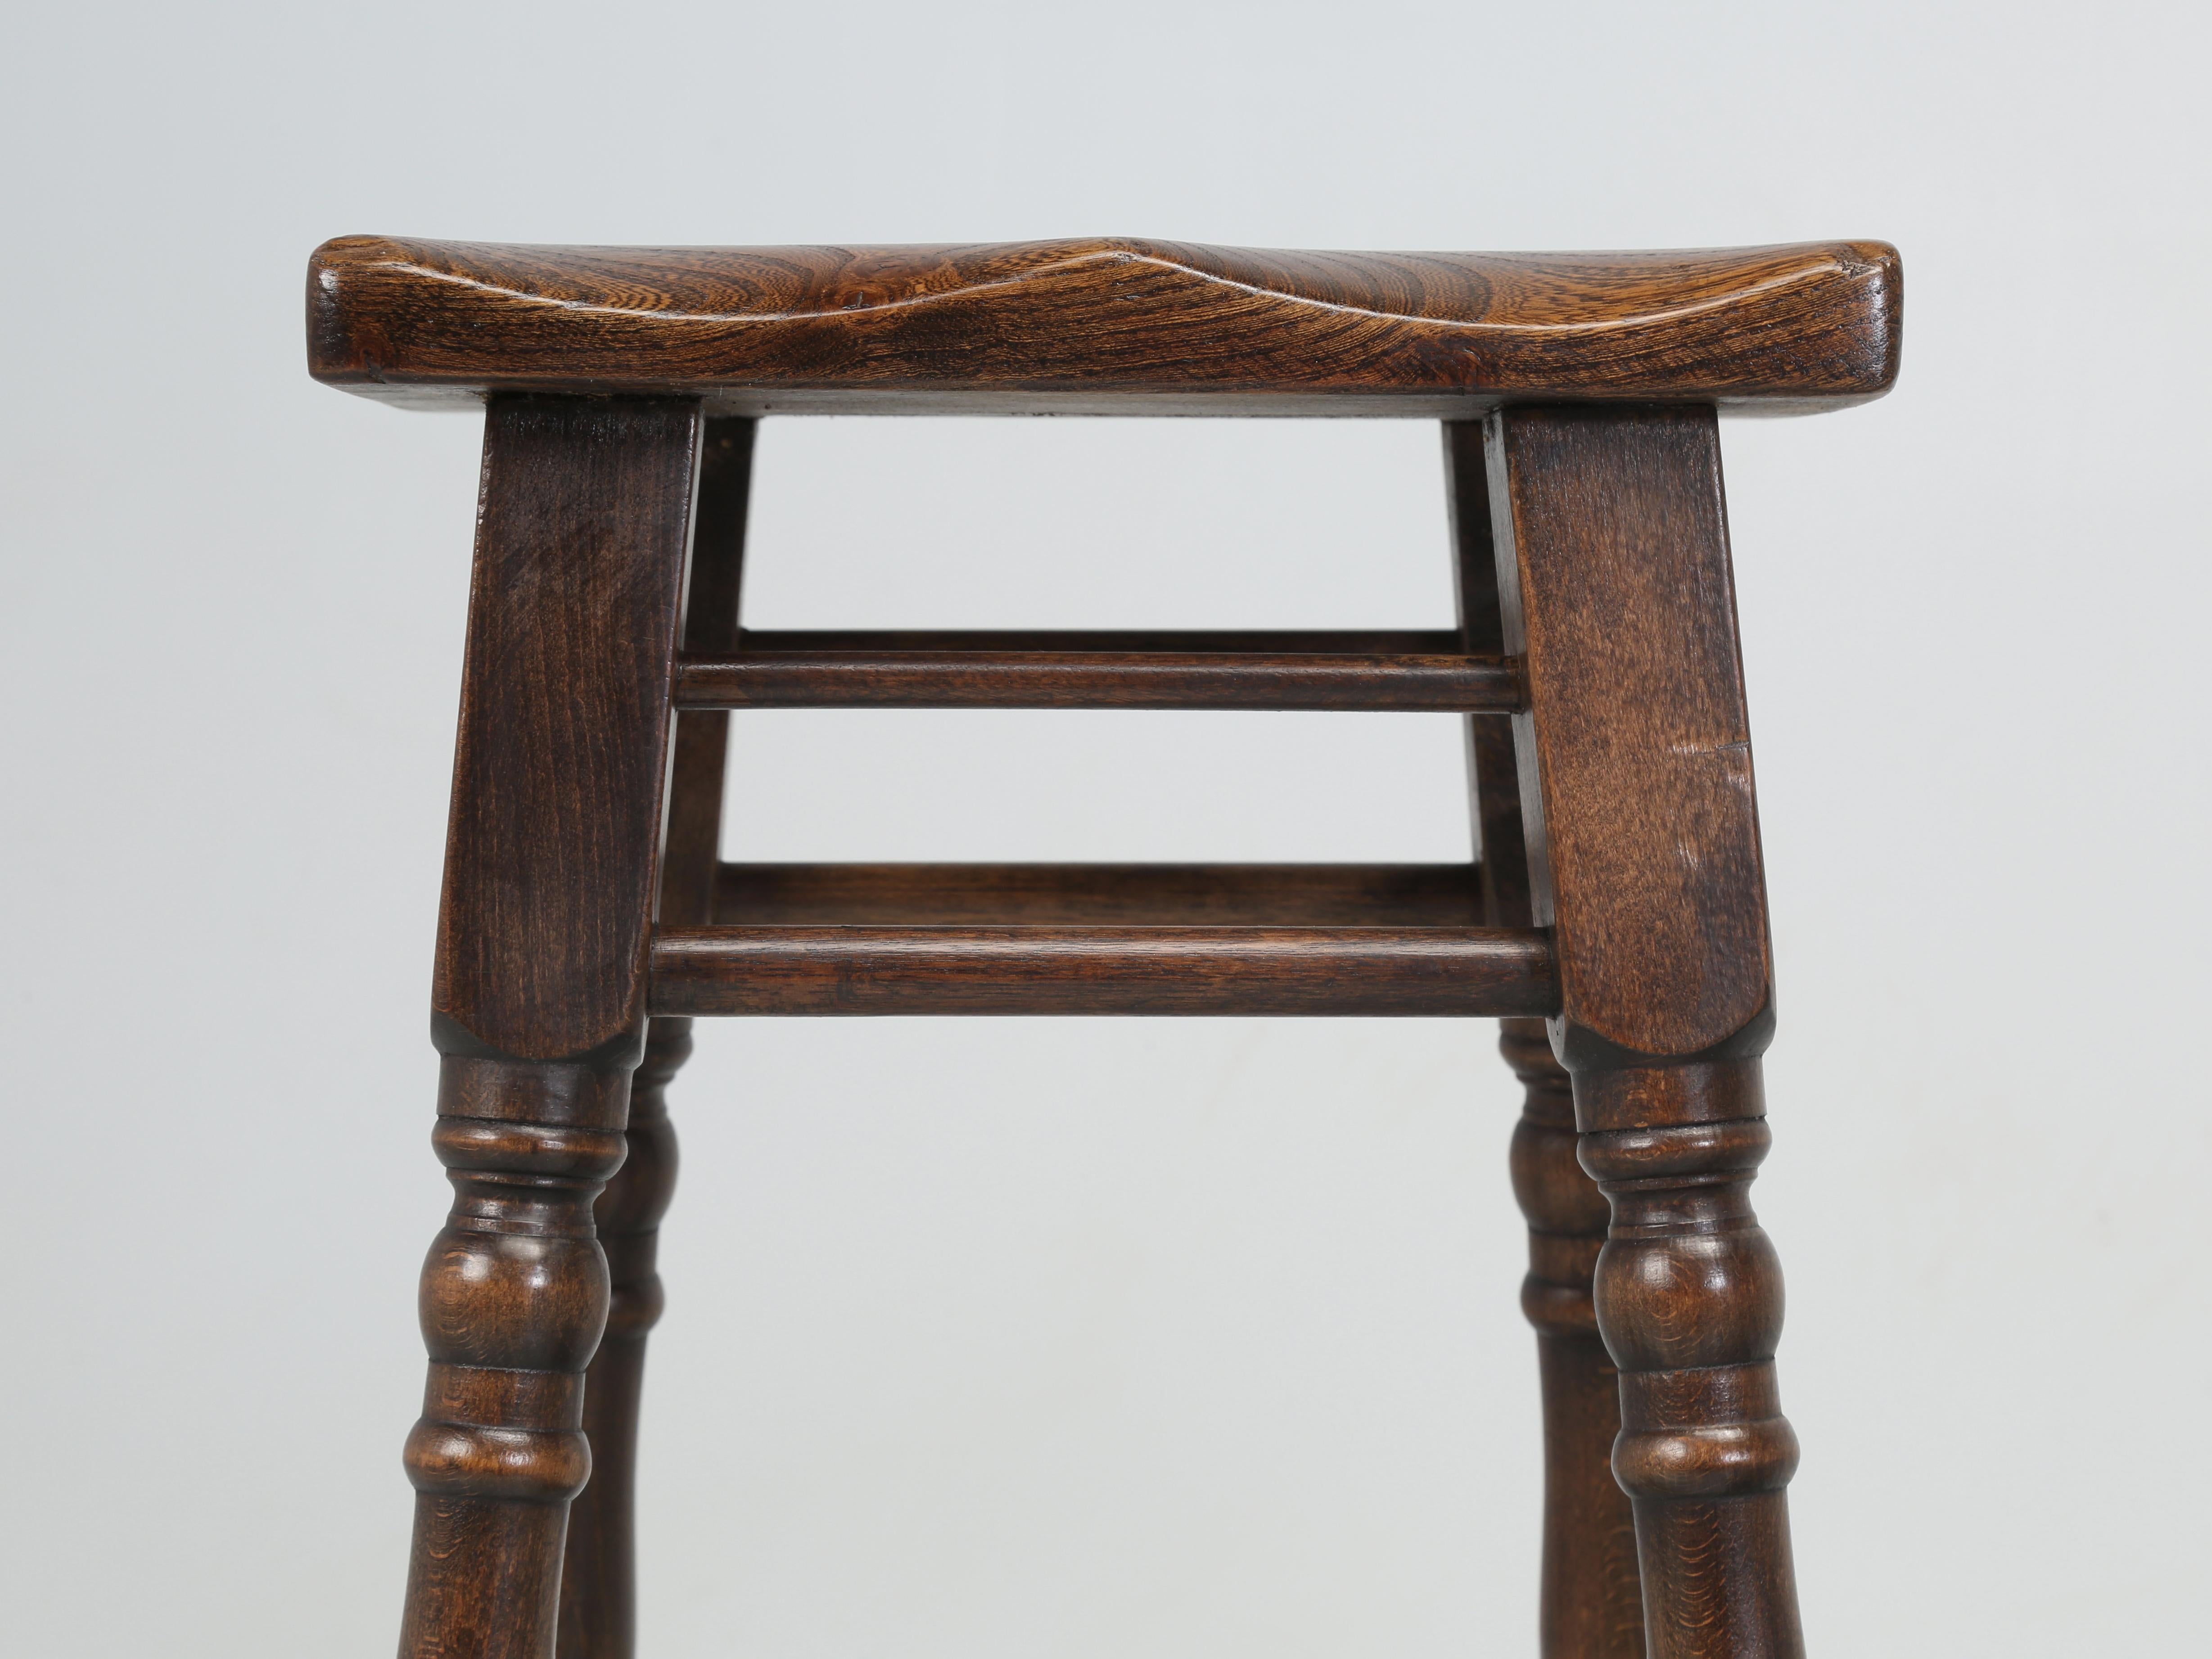 Hand-Carved Pair of Irish Elm Wood Saddle Seat Stools Perfect for American Kitchen Counters